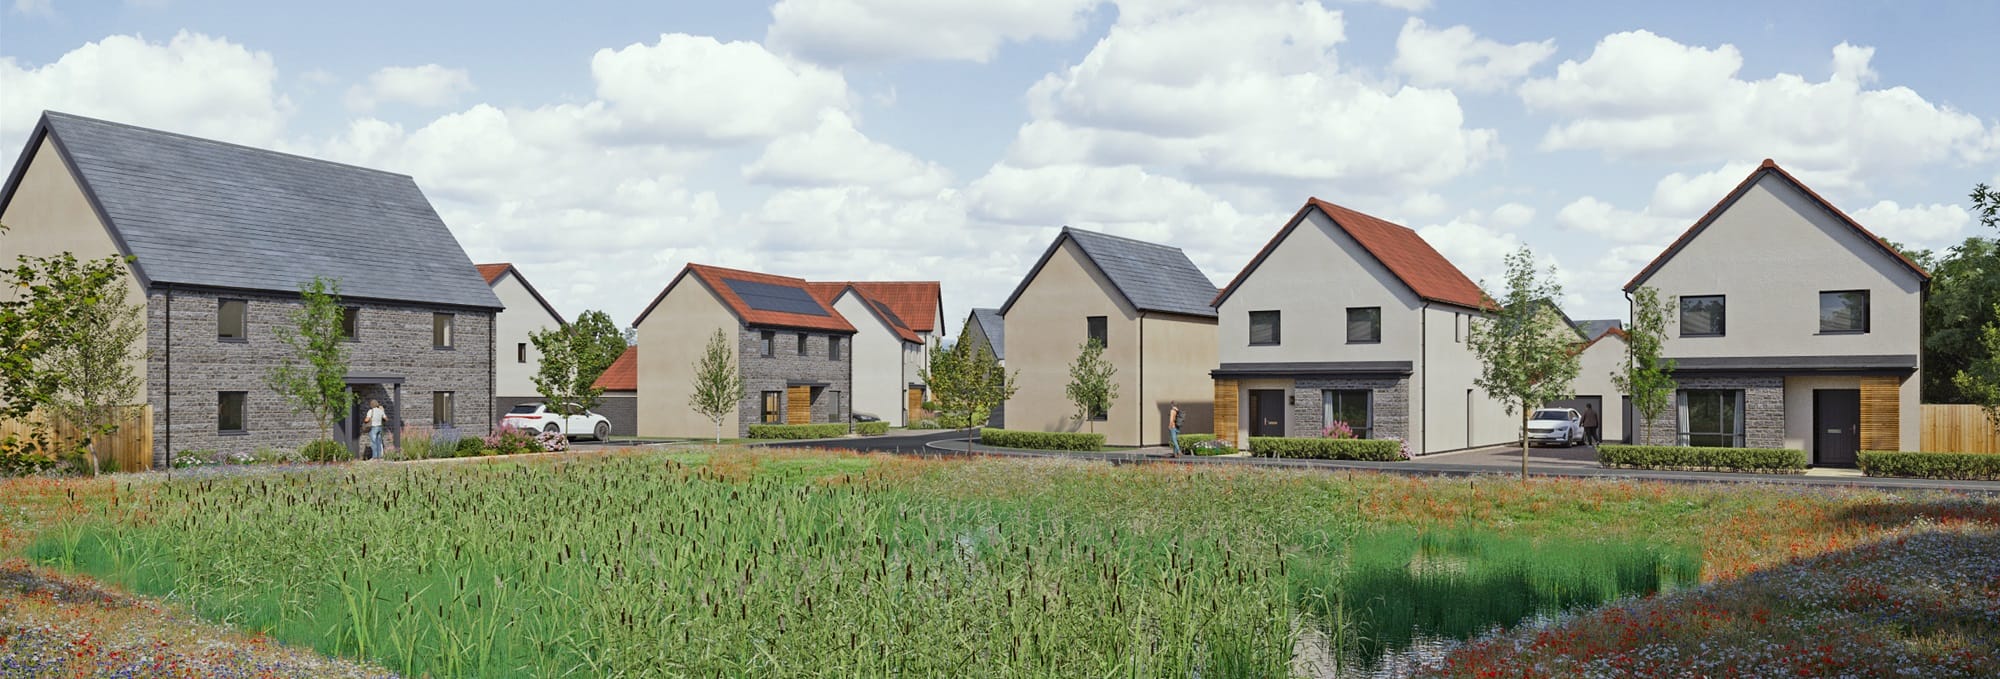 New homes in north Somerset